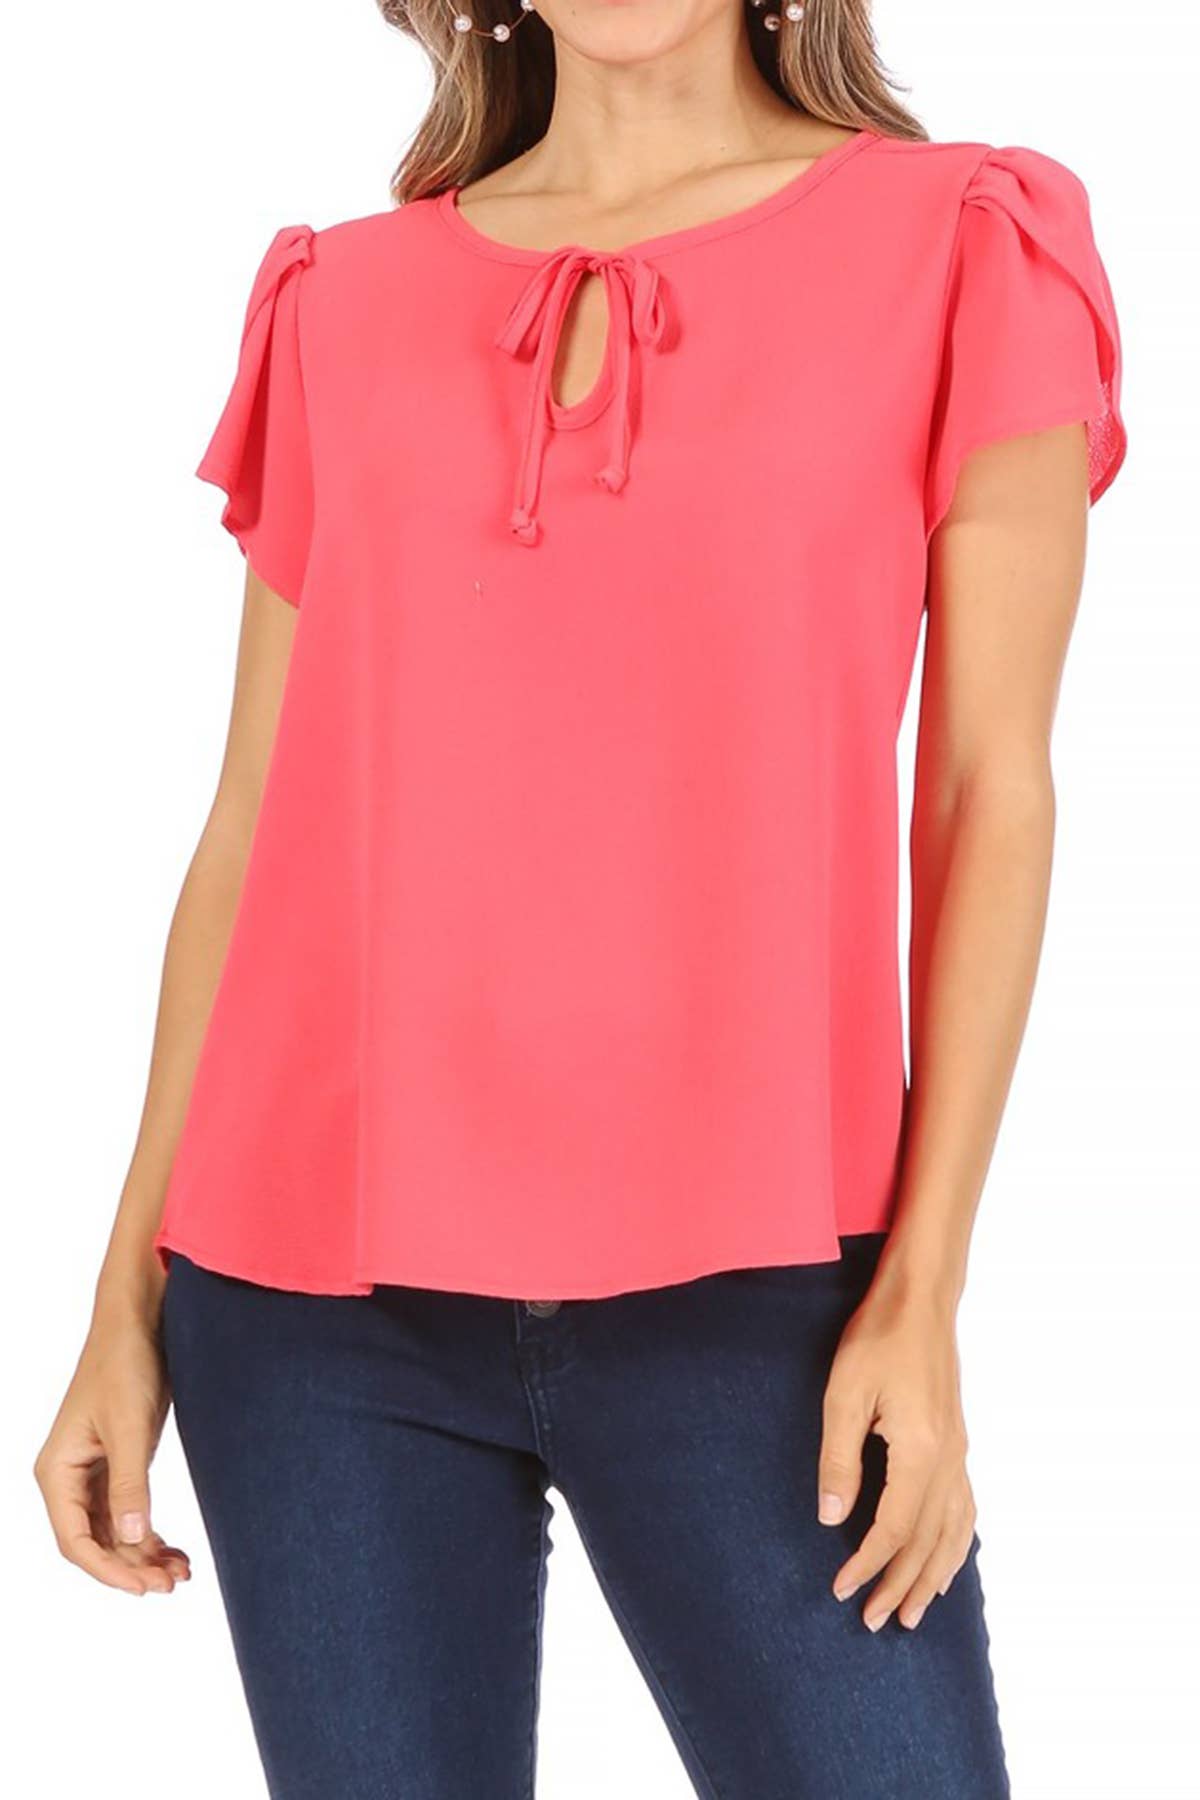 Women's Casual Solid Sleeve Tie Round Neck Shirt